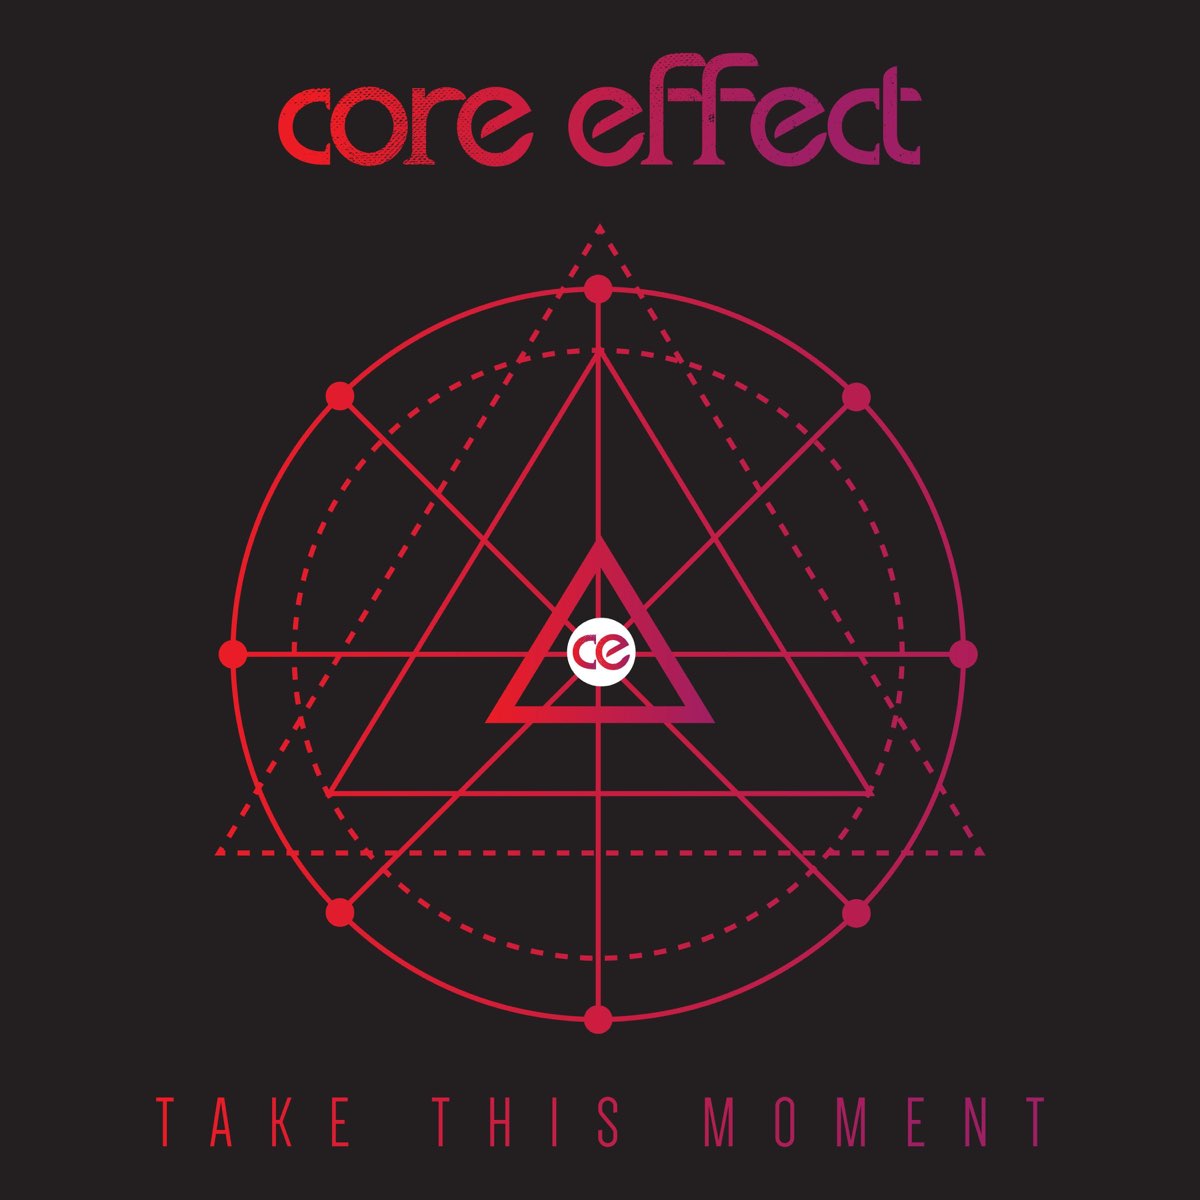 Core affect. ‘’Coring’’ Effects. Take this moment